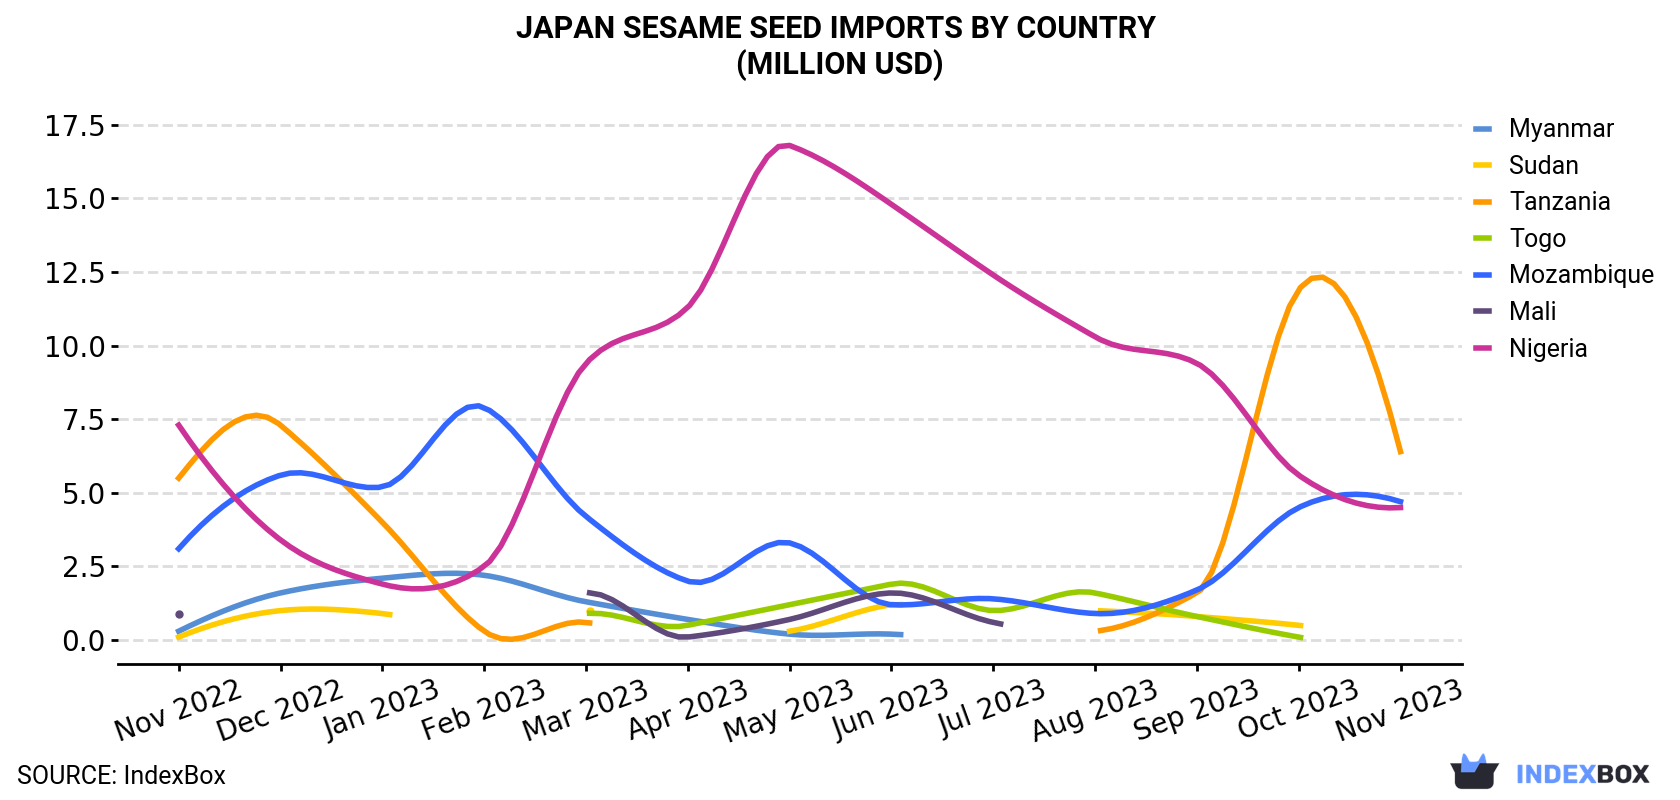 Japan Sesame Seed Imports By Country (Million USD)